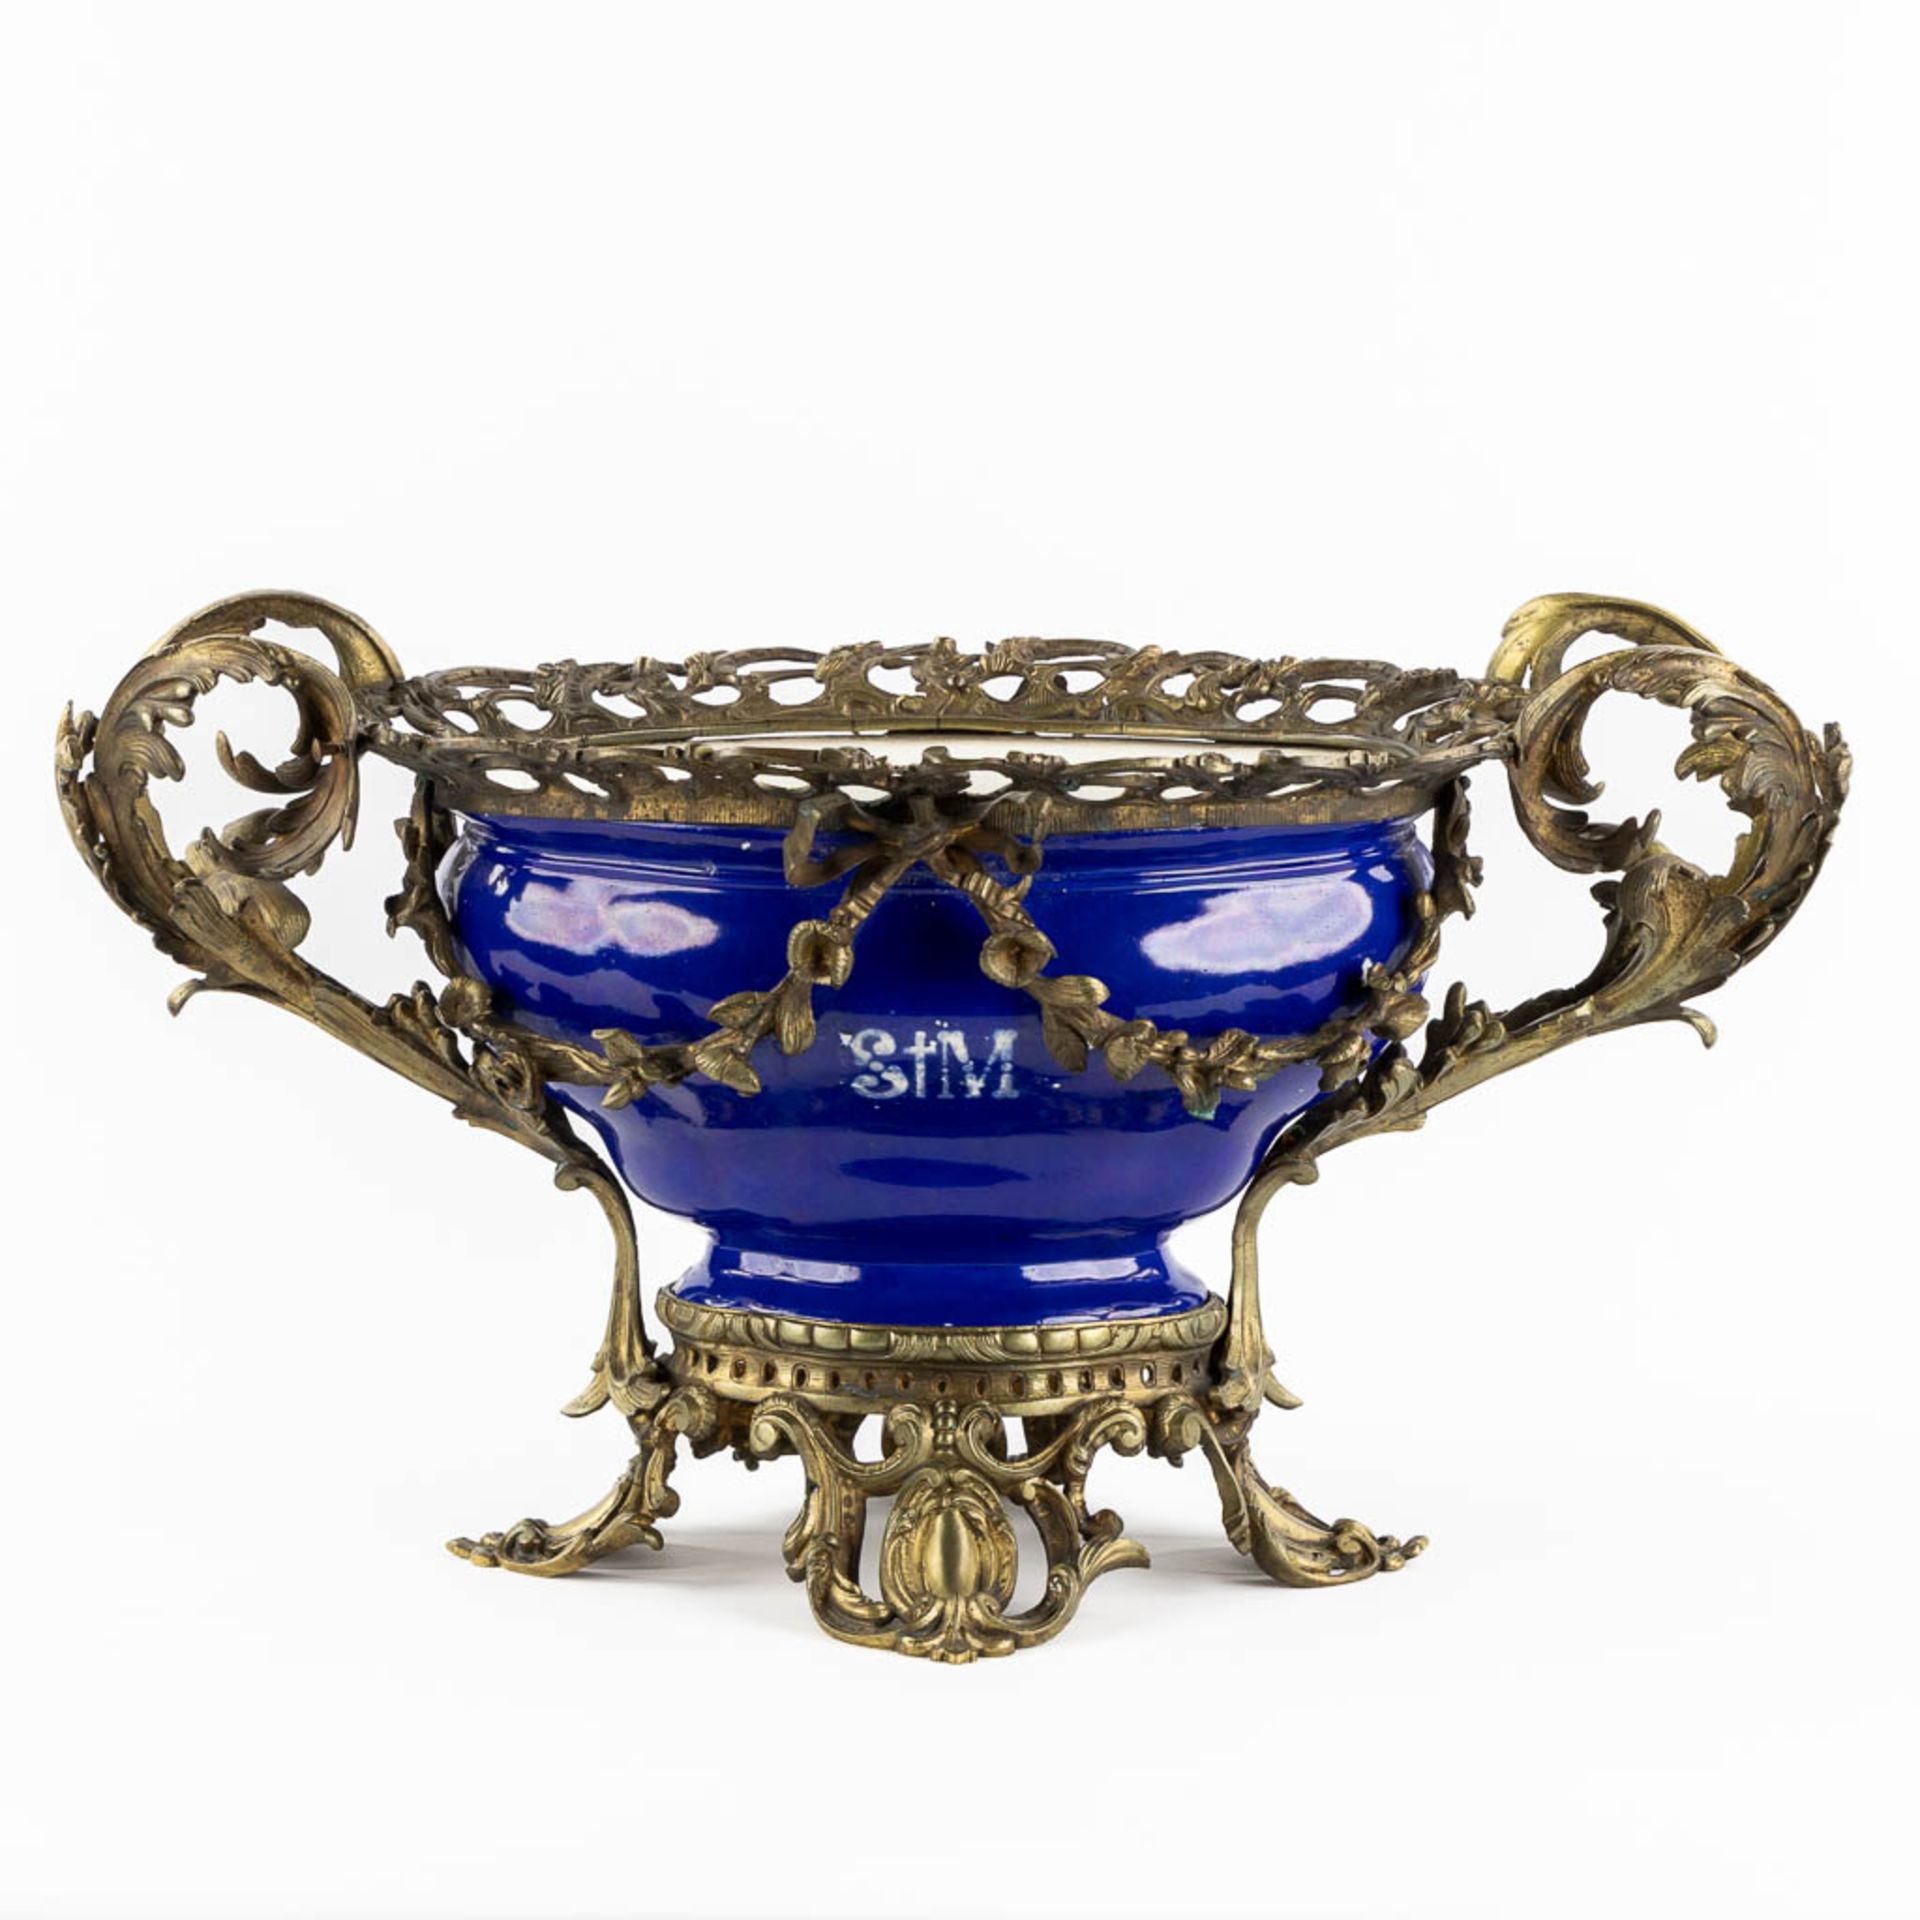 A large blue-glaze faience blowl mounted with bronze, 19th C. (L:31 x W:61 x H:34 cm)